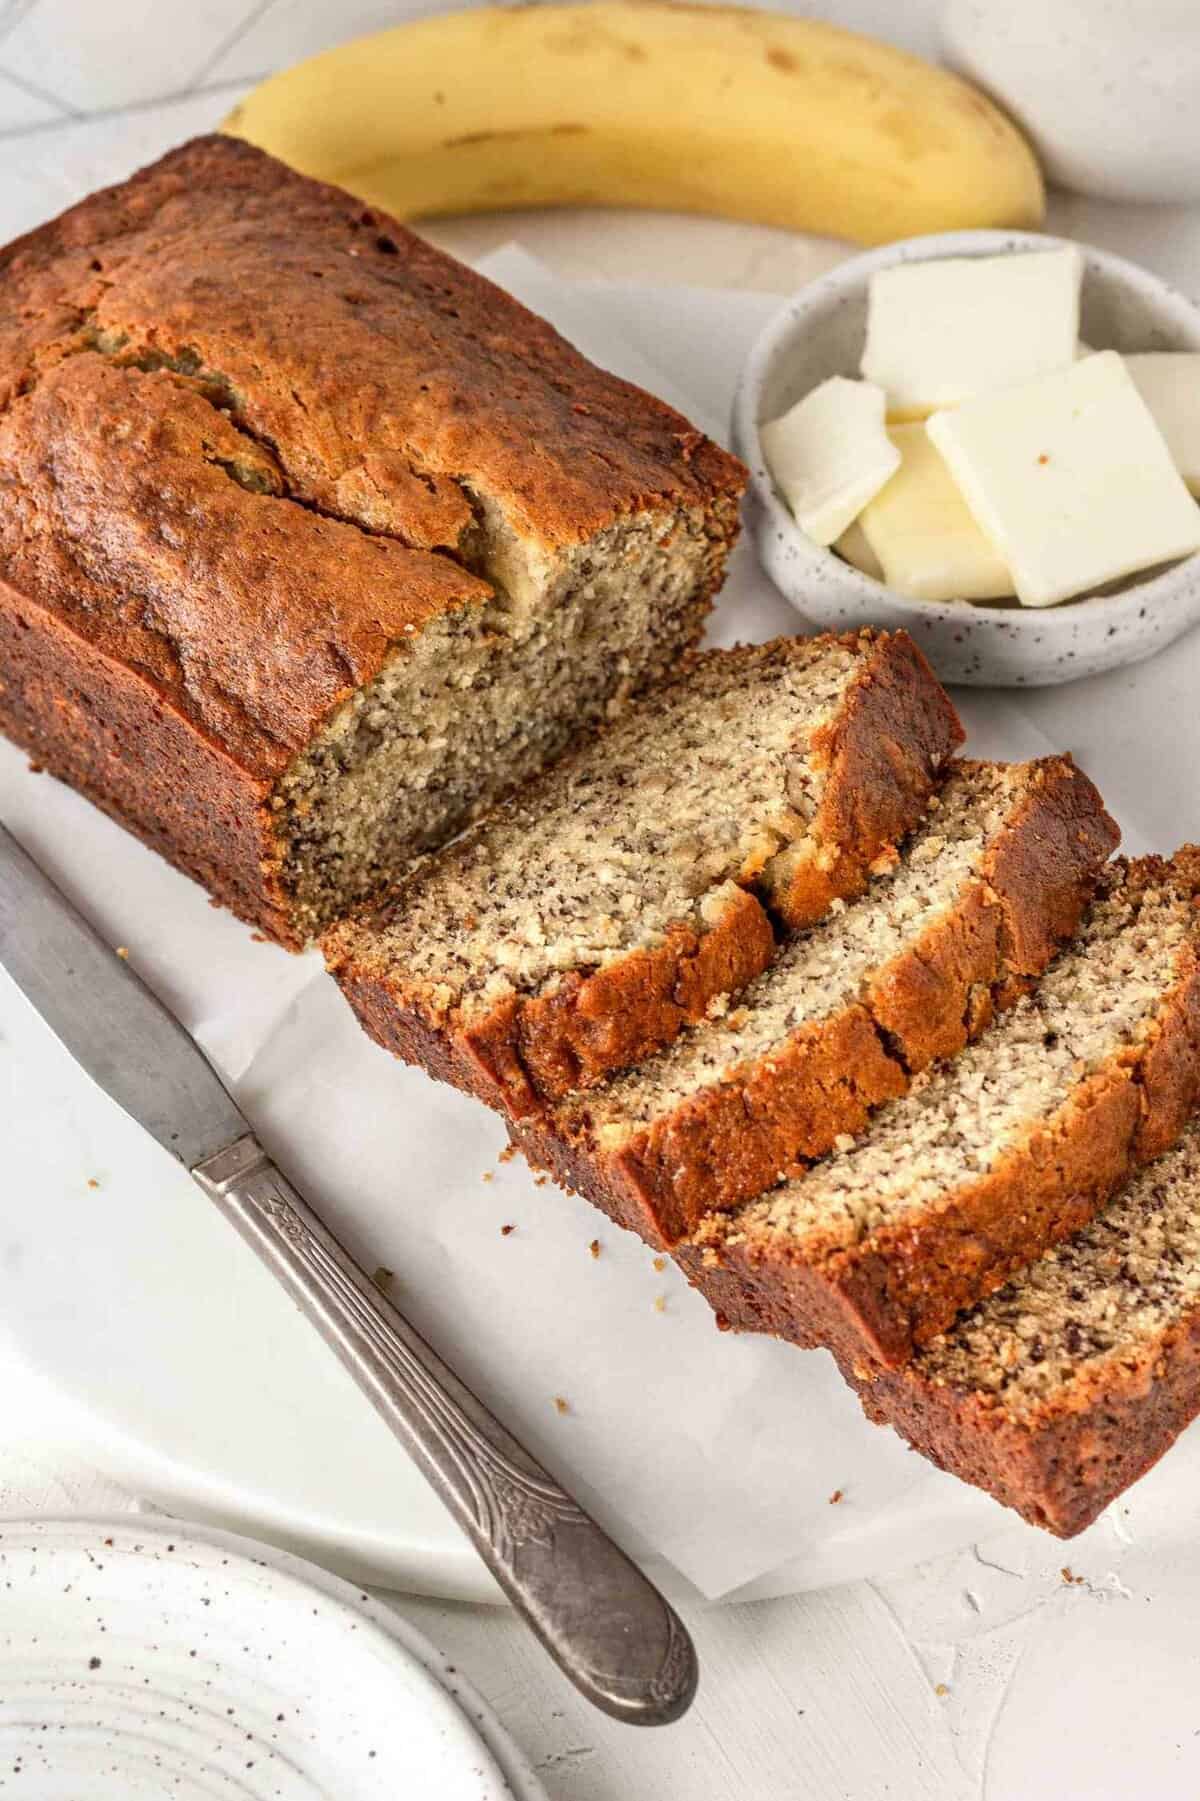 Irresistible Banana Bread Recipe for Your Sweet Cravings